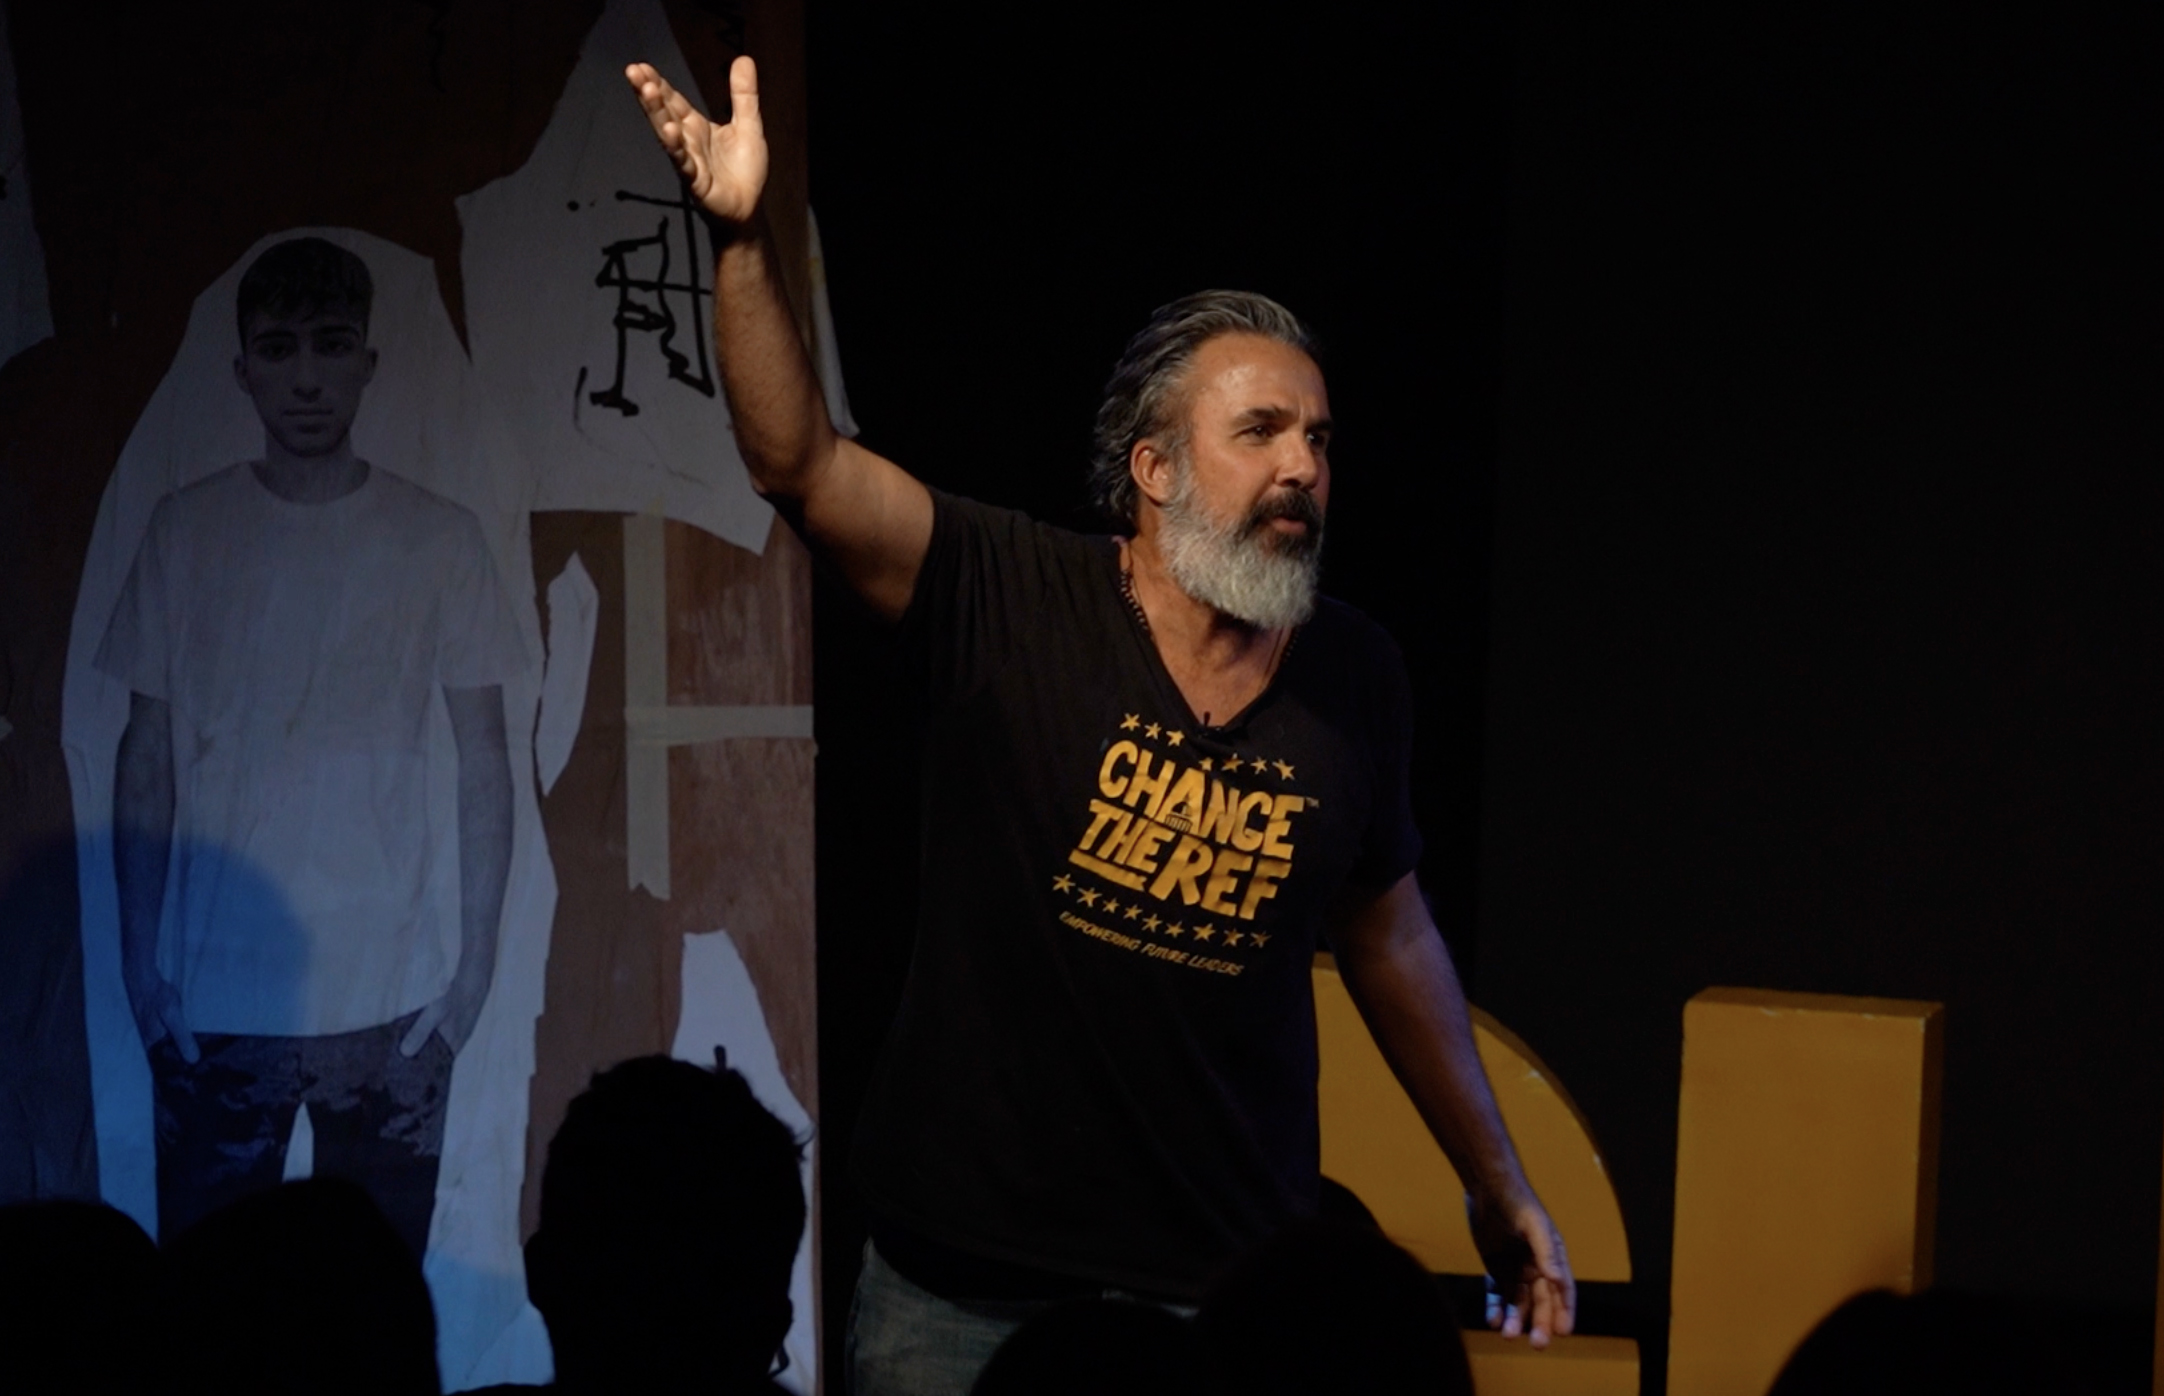 A man stands on a stage wearing a black T-shirt.